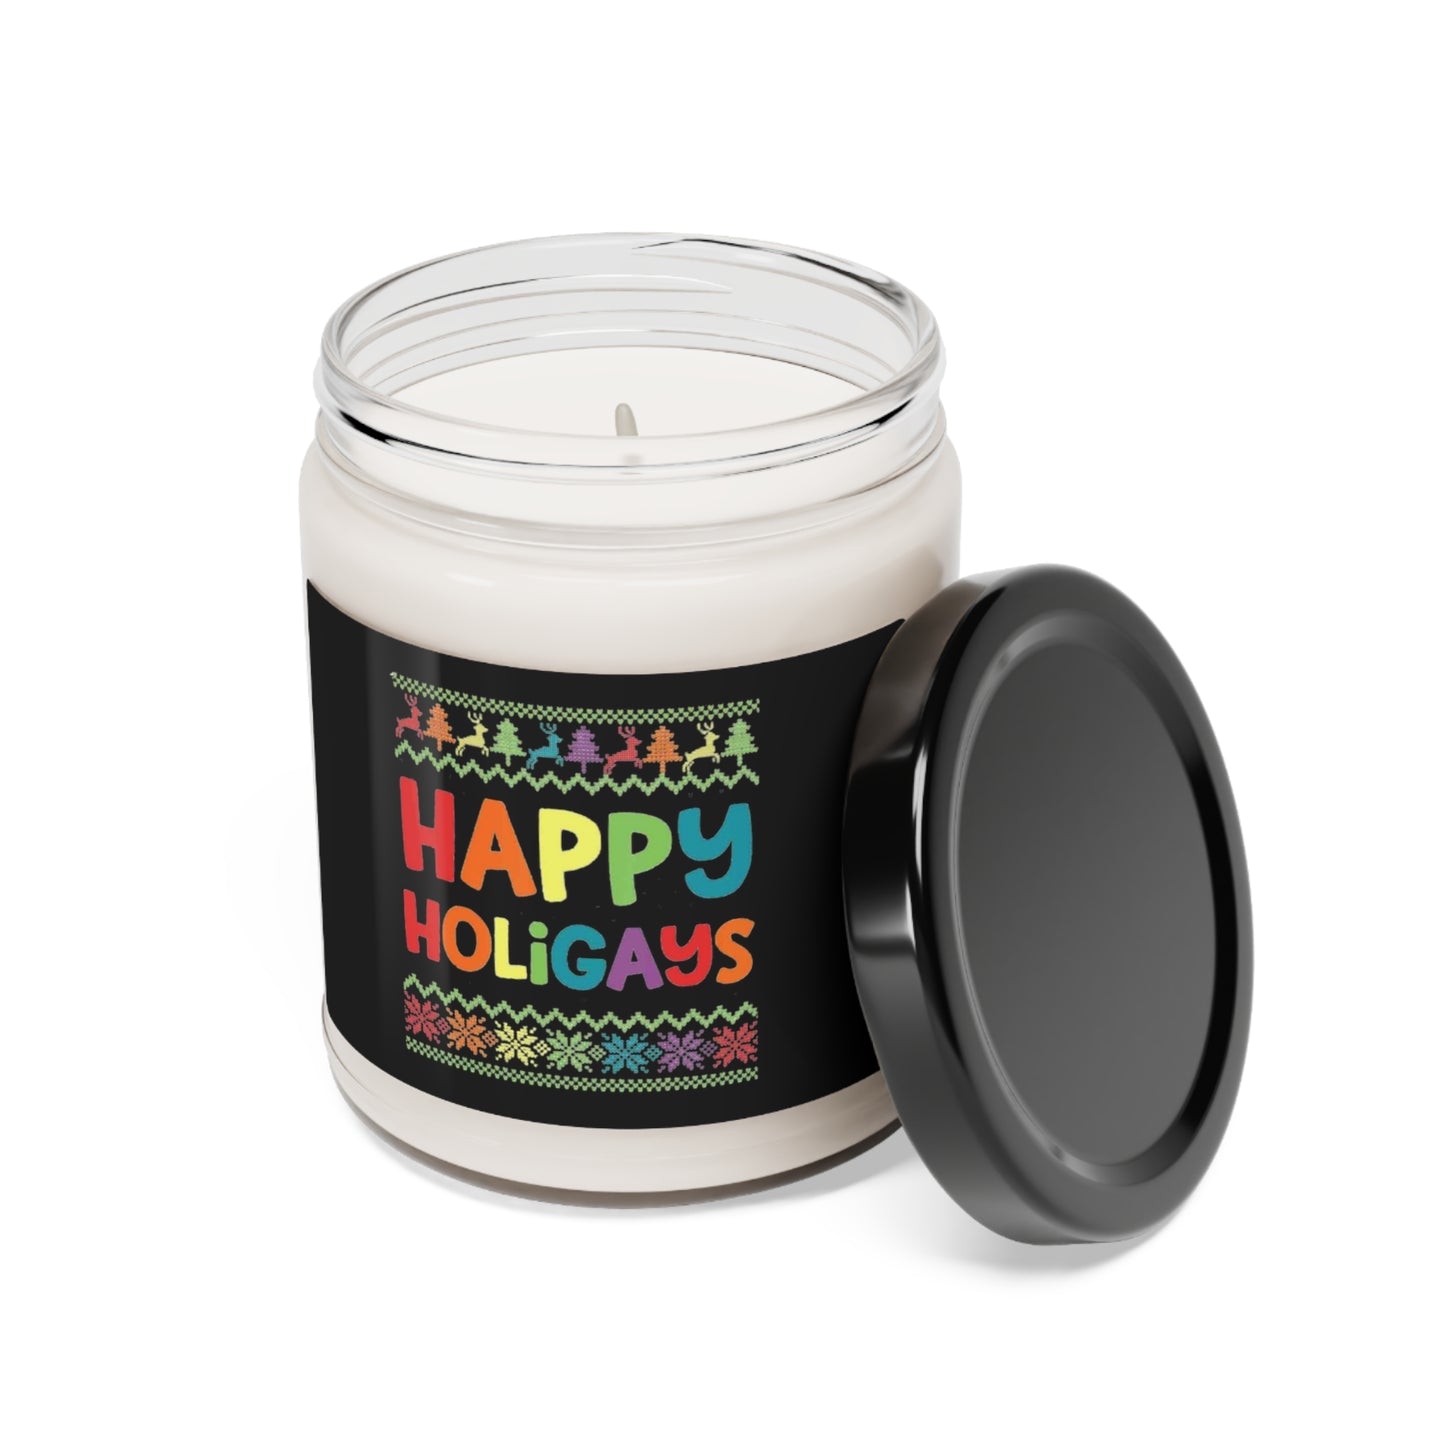 Happy Holigays Candle